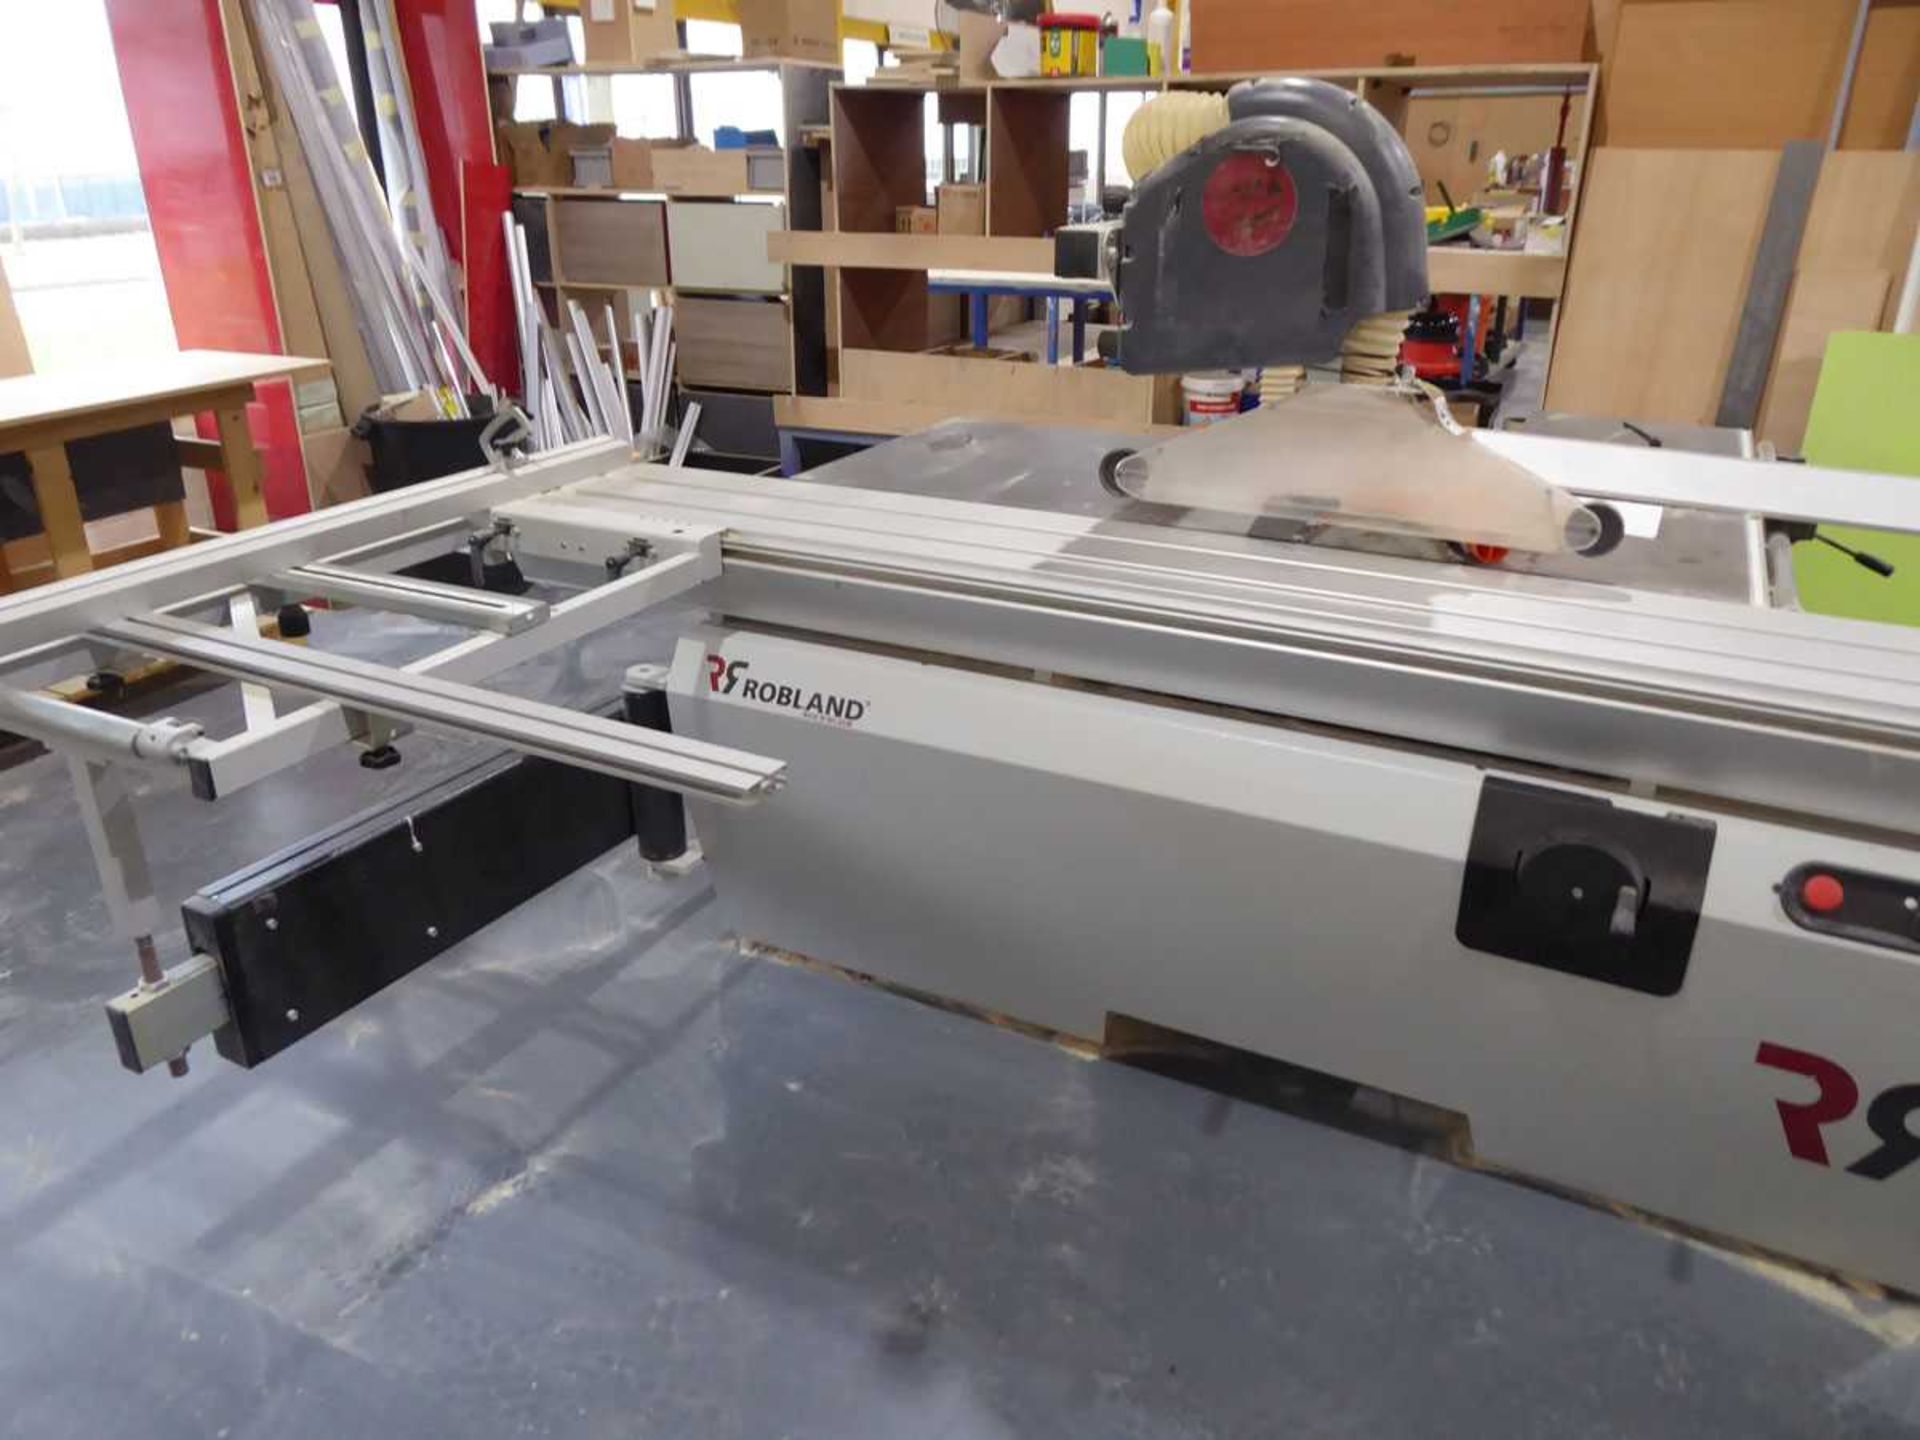 +VAT Robland FZ300 sliding table panel saw, serial no. 26KL22556, year 2020 - Image 5 of 7